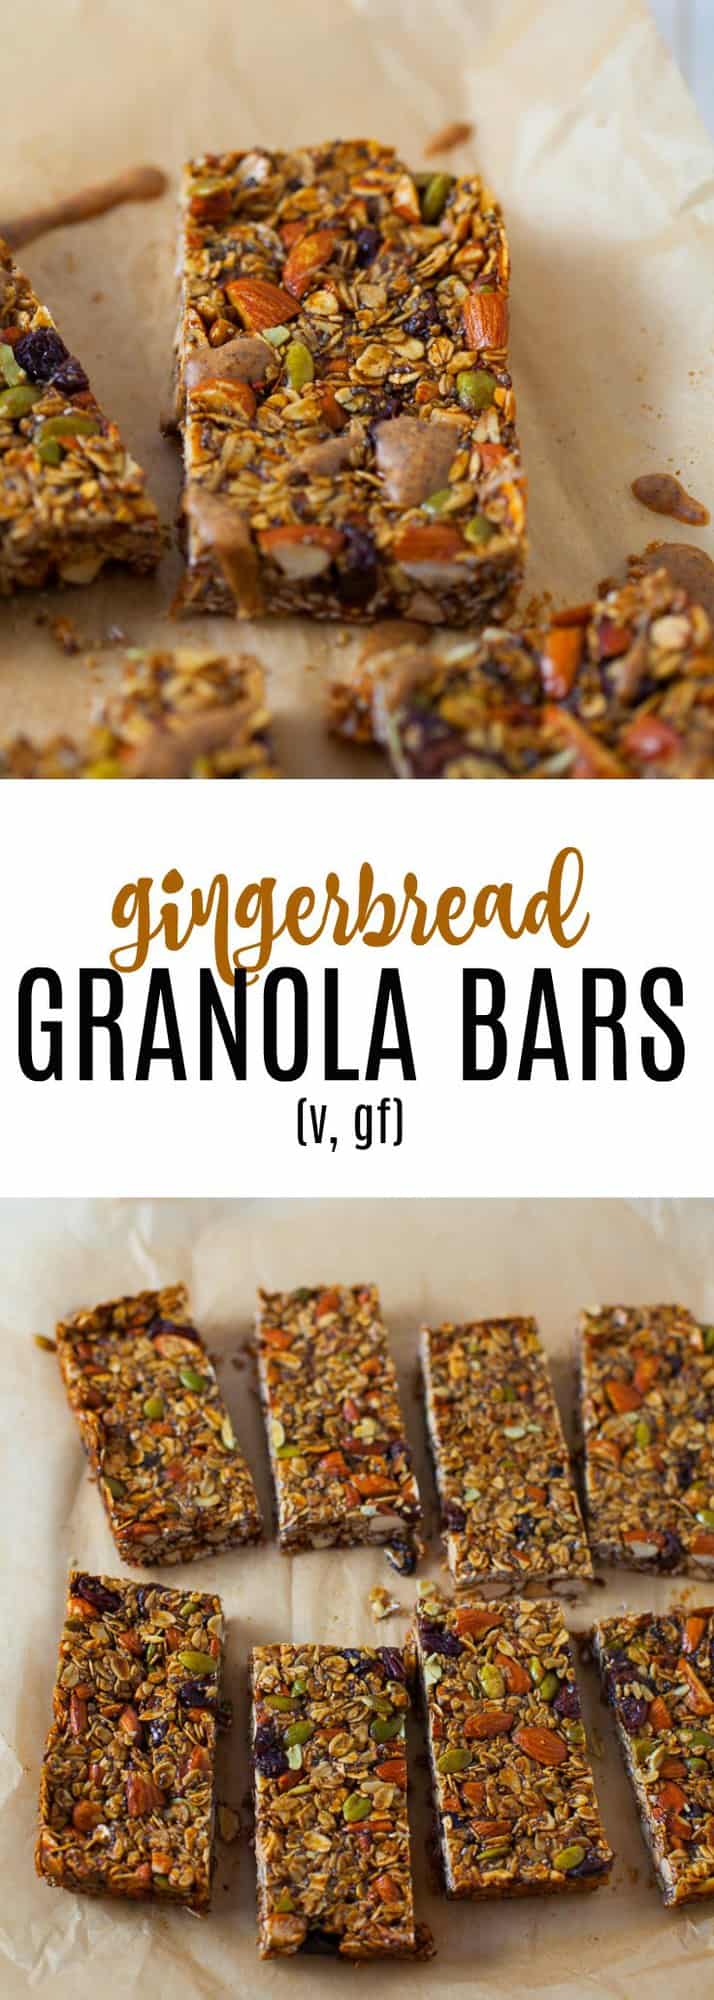 The perfect holiday snack to nosh on this season, these homemade gingerbread granola bars are full of holiday spice and nourishing ingredients that are sure to satisfy!